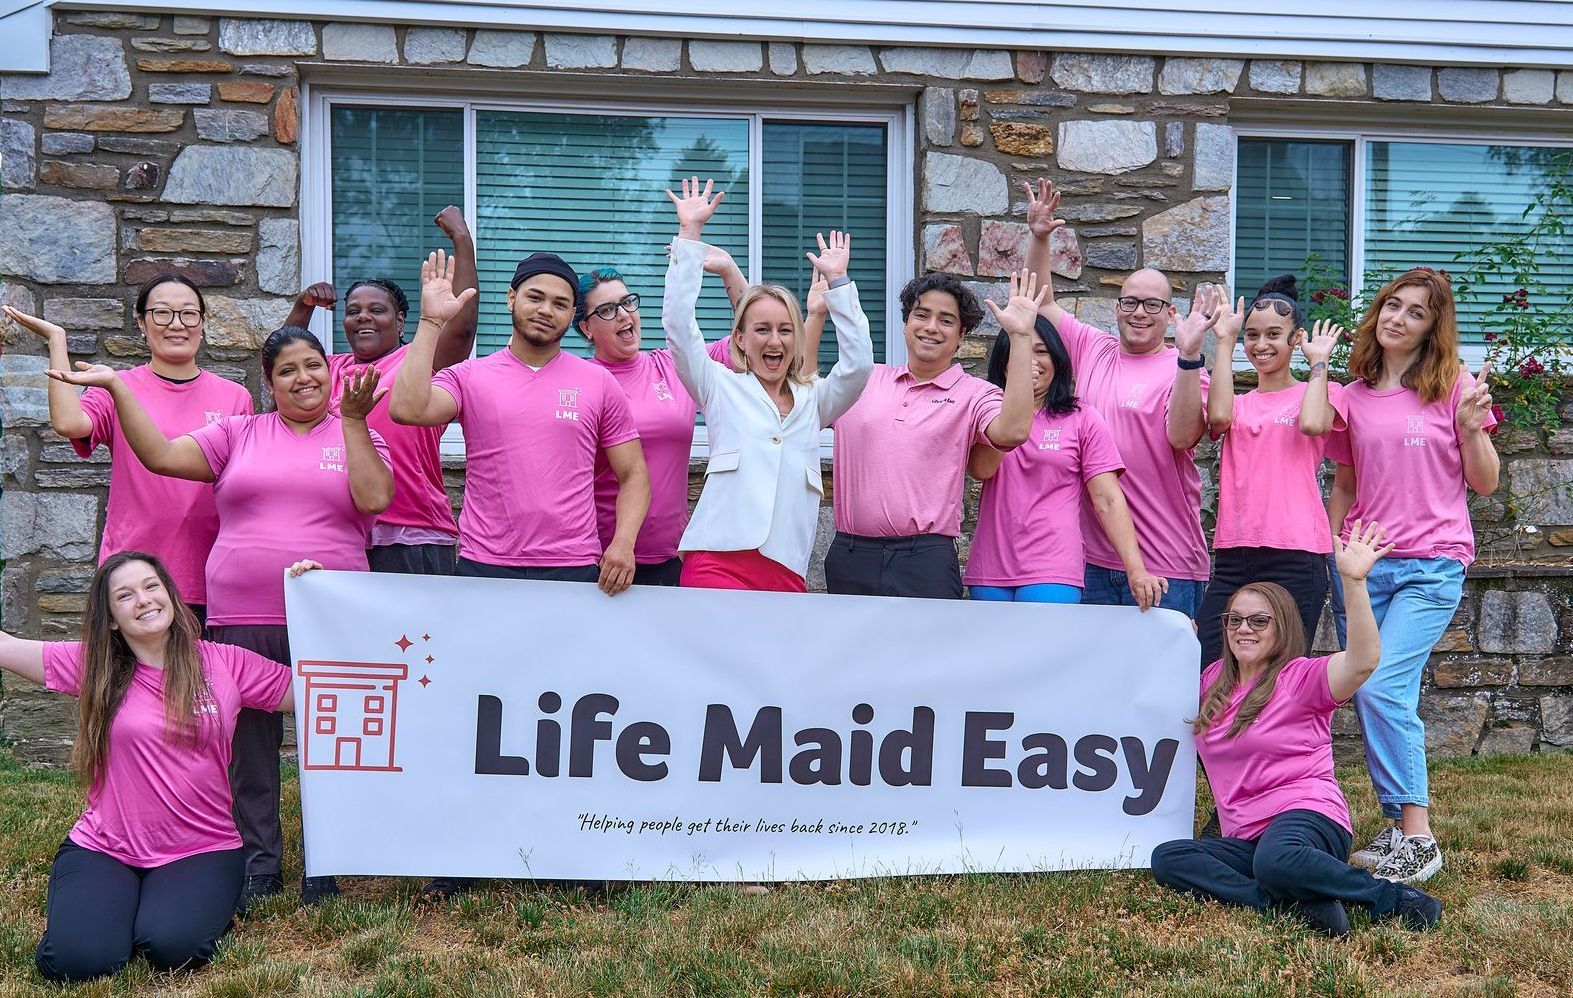 group photo of Life Maid Easy team and employees